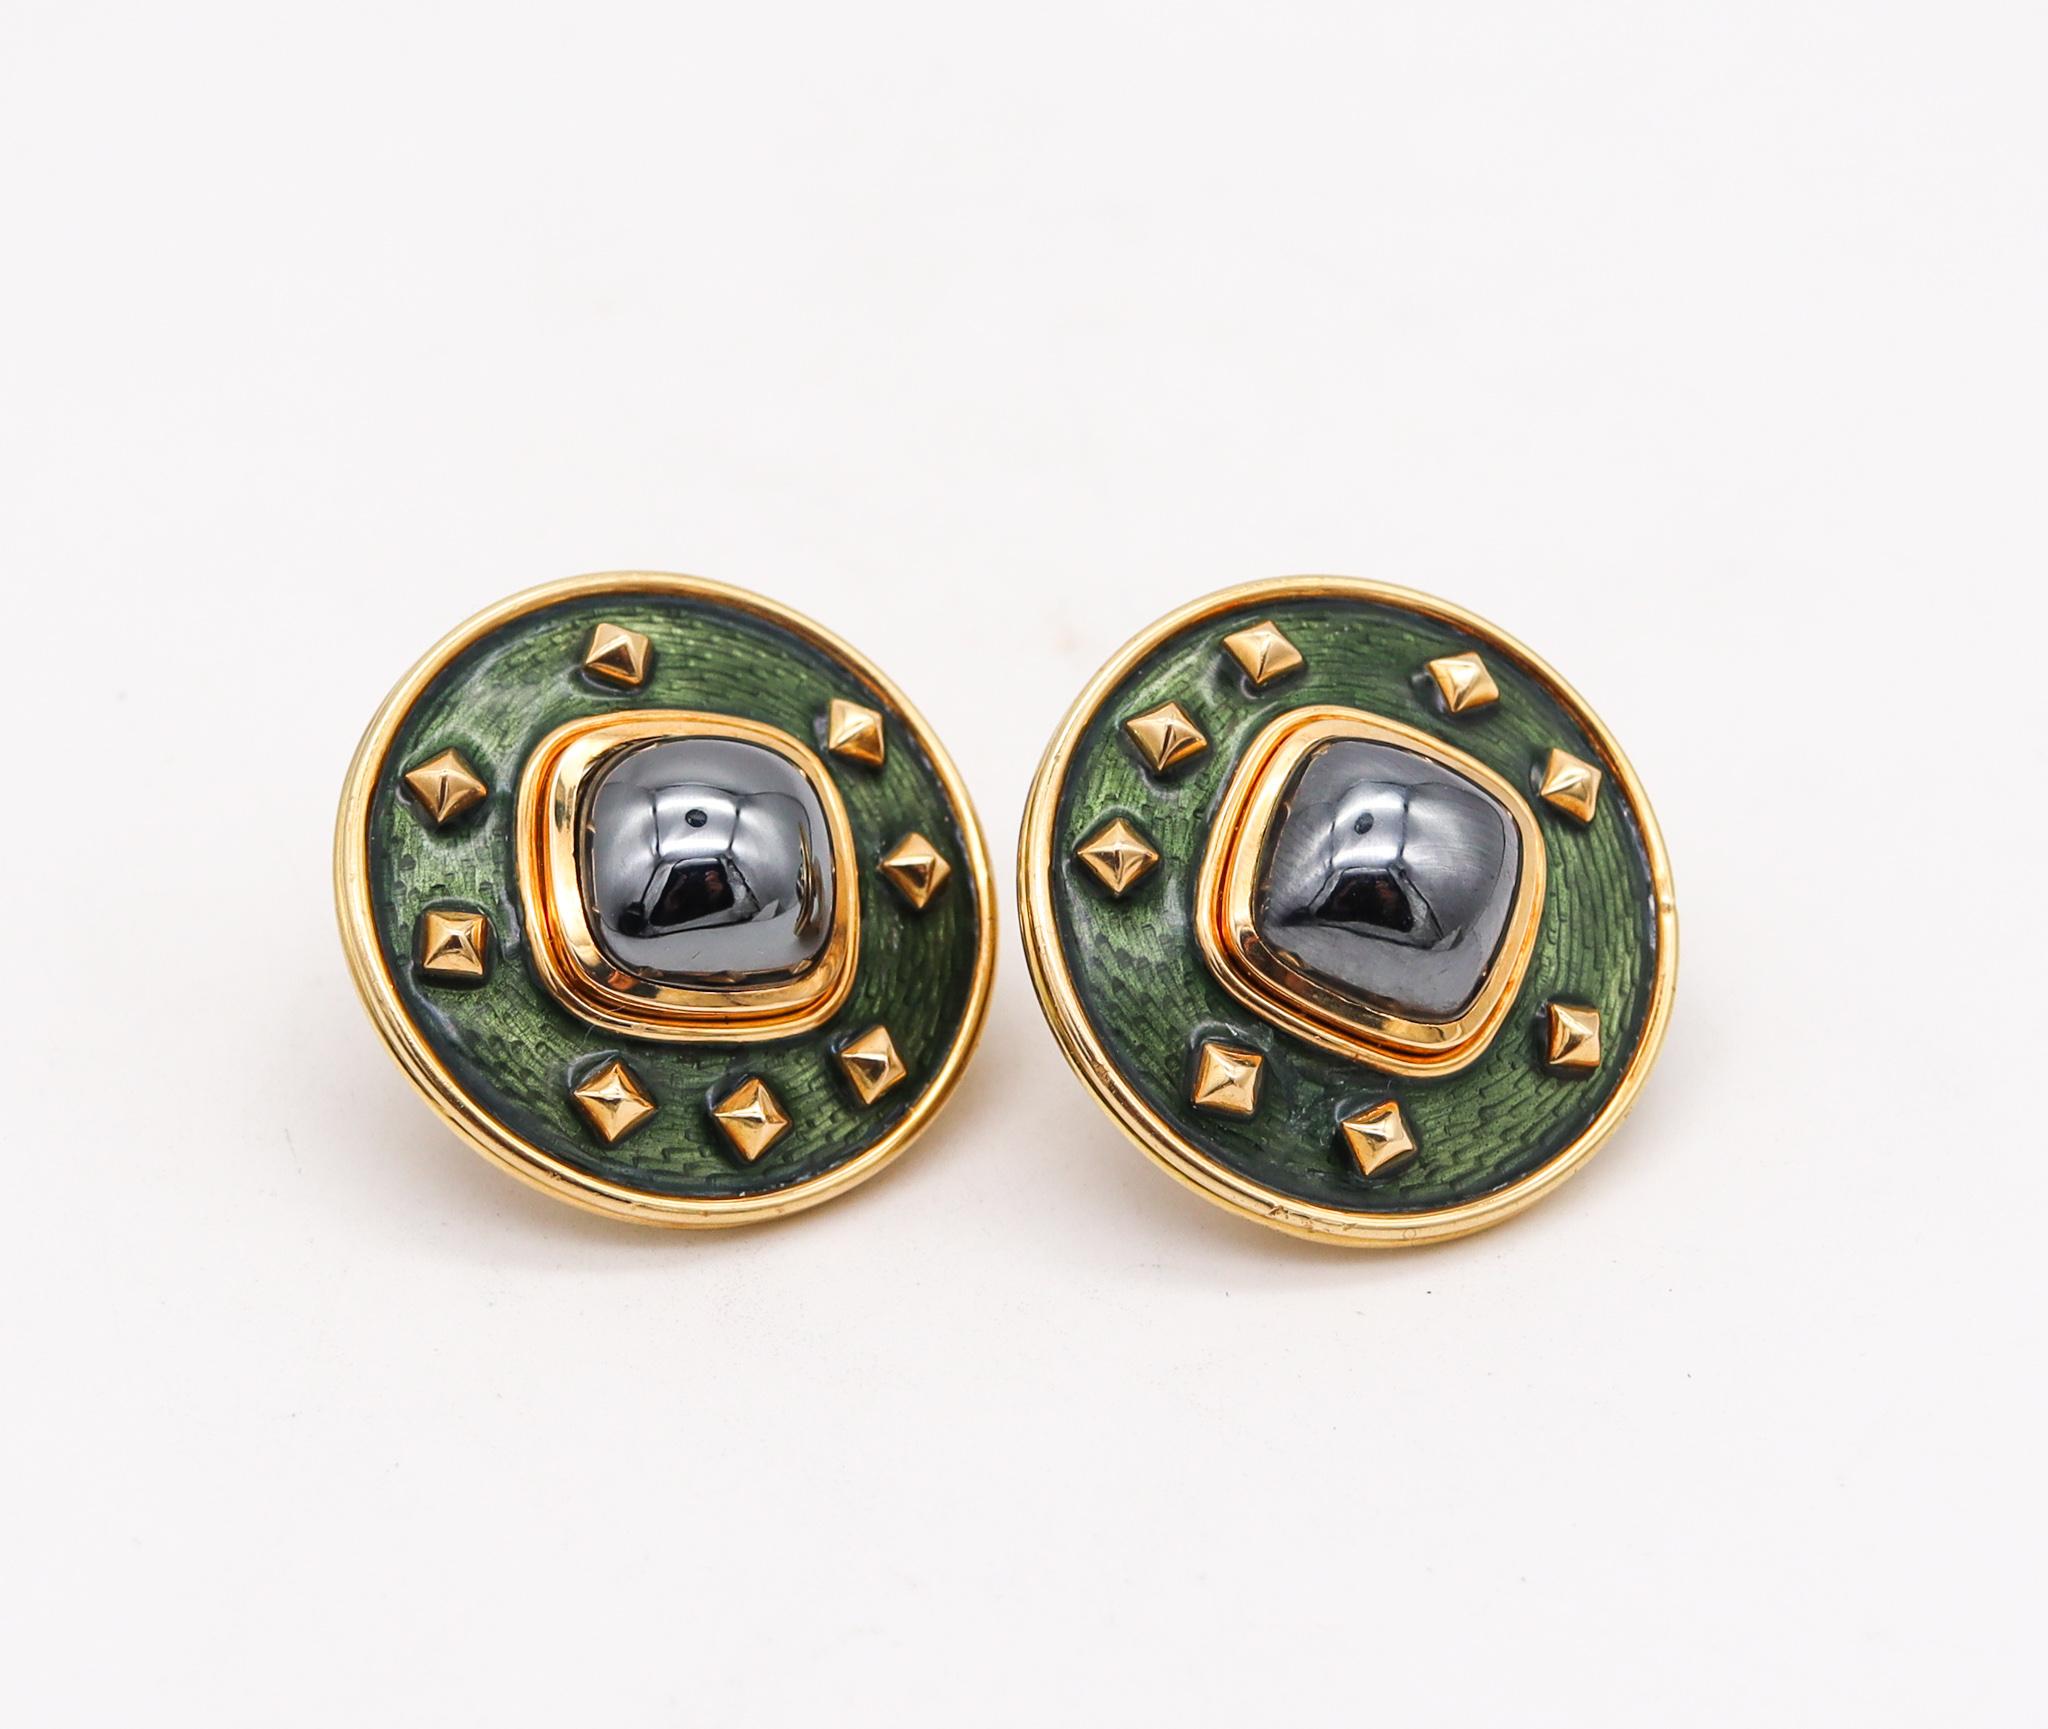 Pair of clips-earrings designed by Leo De Vroomen.

Beautiful and colorful statement geometric round earrings, created in London United Kingdom by the jewelry house of Leo De Vroomen, back in the 1990. This pair of earrings was carefully crafted in